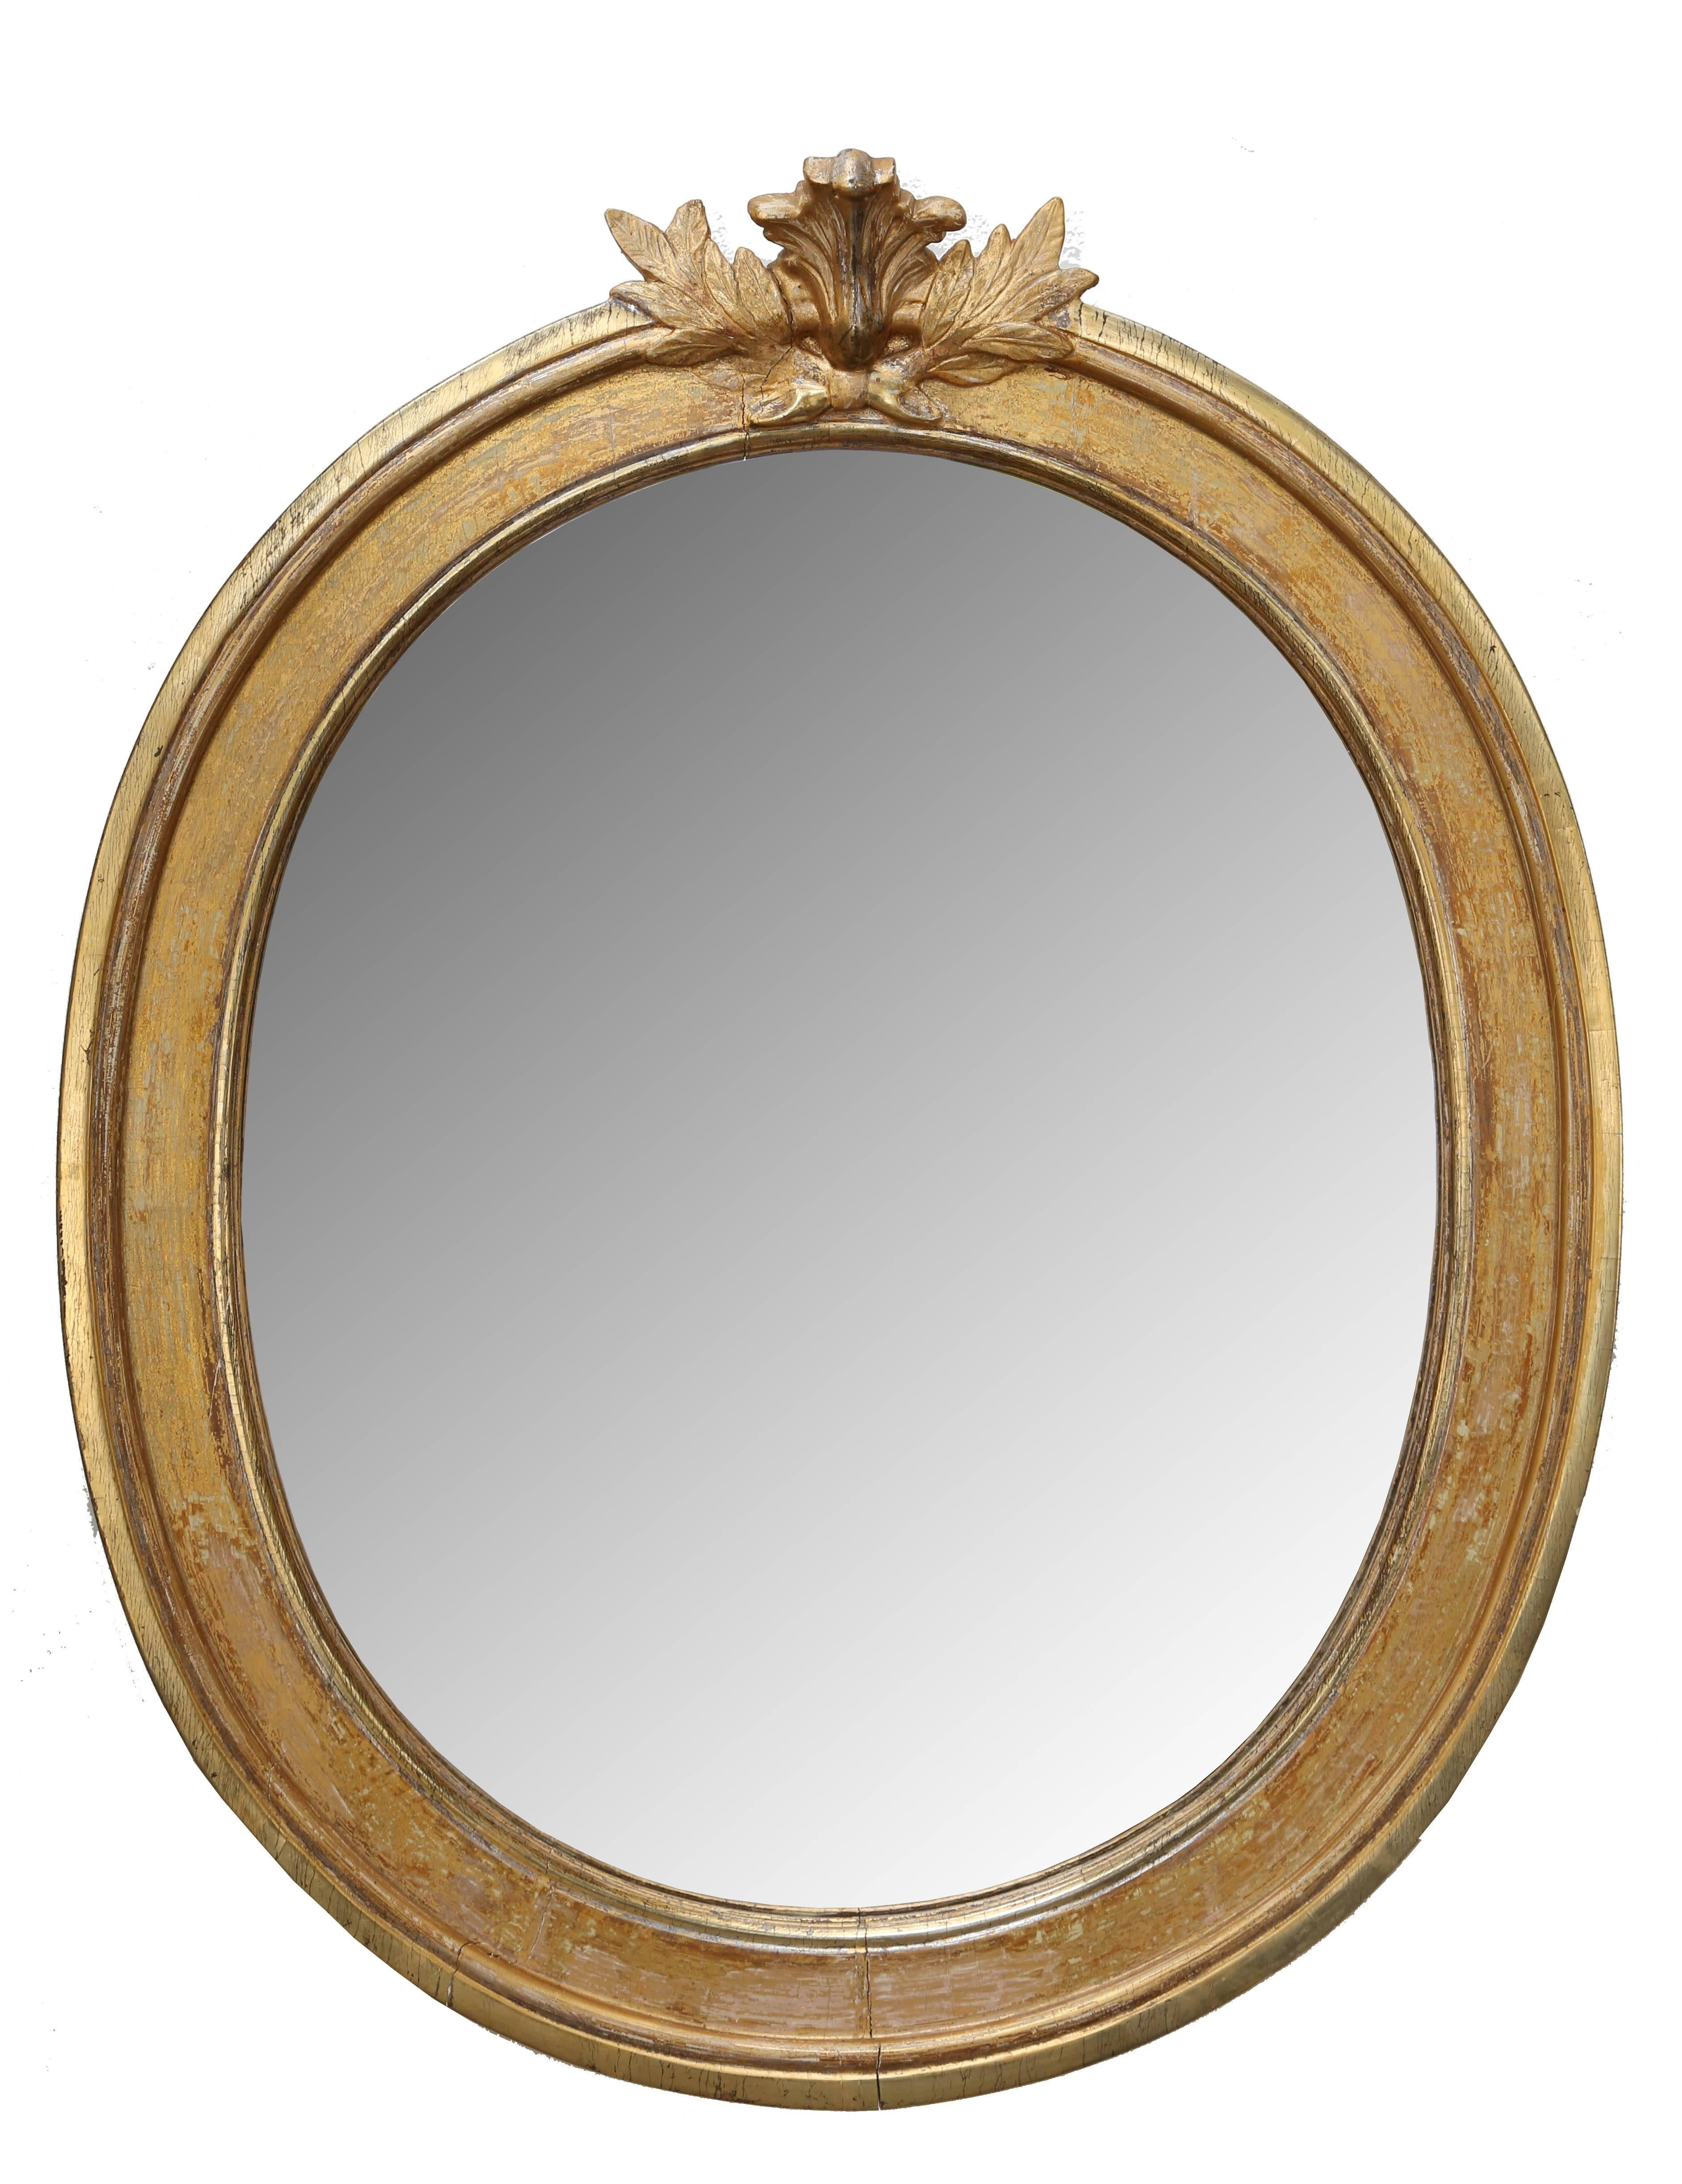 Pair of Antique Swedish Late Gustavian Giltwood Mirrors, Early 19th Century For Sale 1